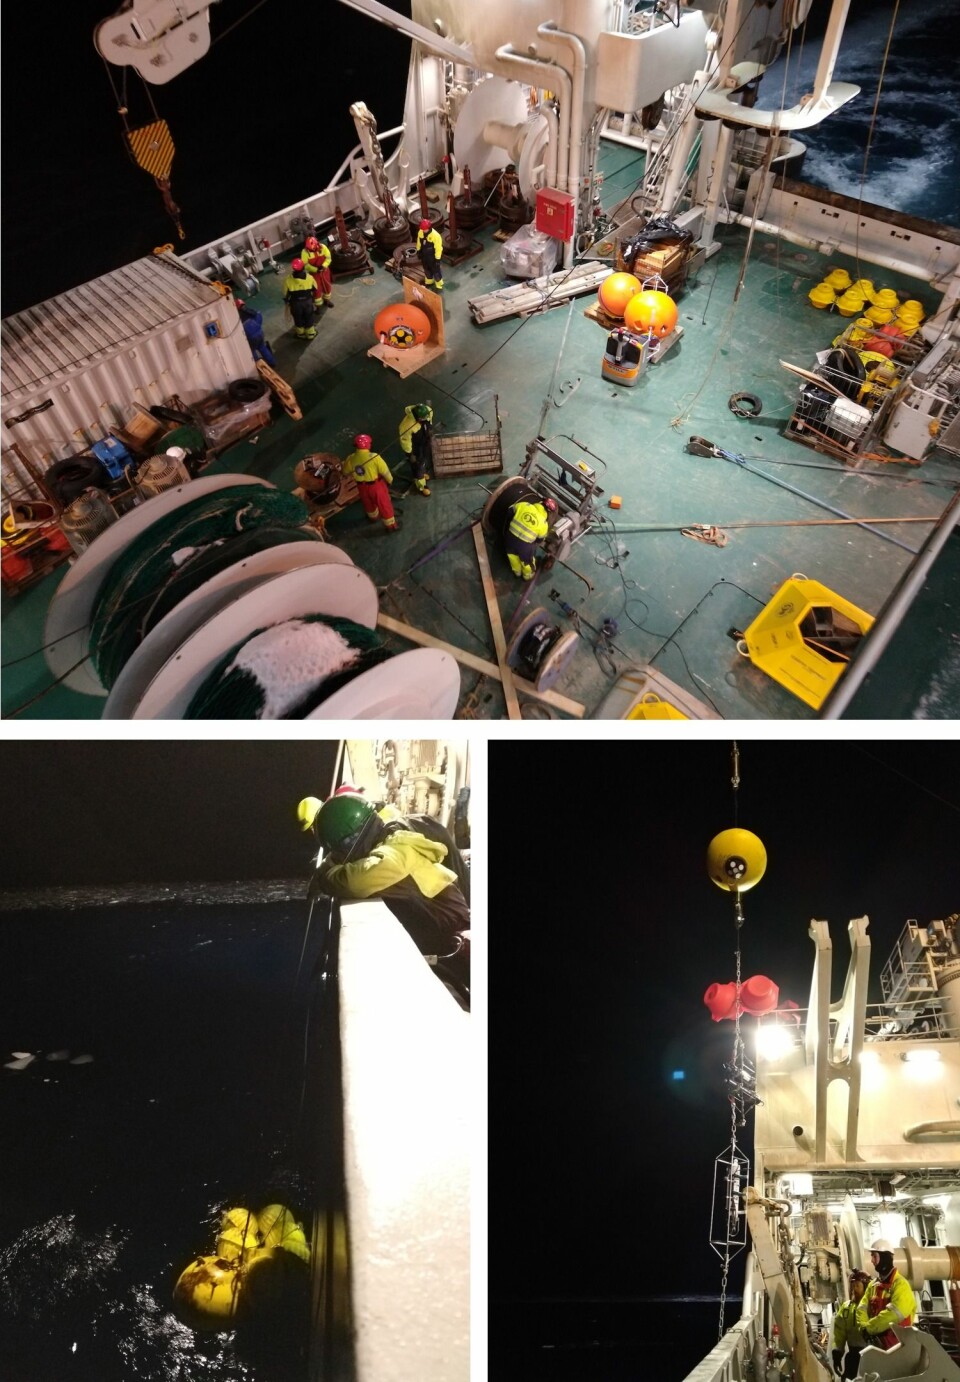 Retrieving and deploying oceanographic rigs is a demanding operation that would not be possible without the trained and knowledgeable crew of the ship.